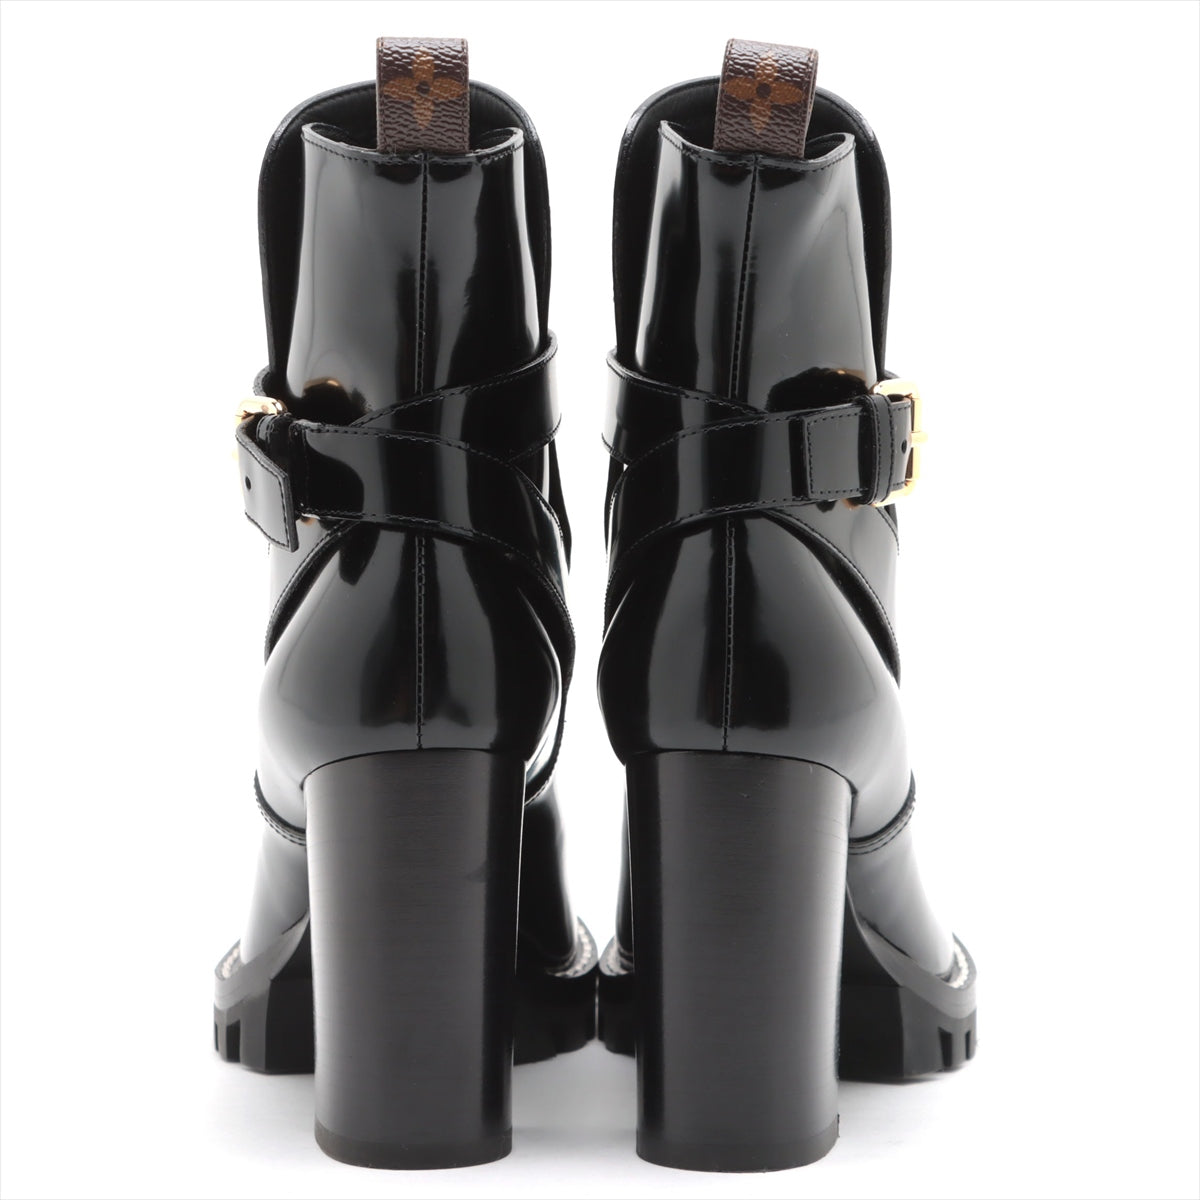 Louis Vuitton Star Trail Line 21 years Patent Leather Short Boots 38.5 Ladies' Black MA0231 monogram studs